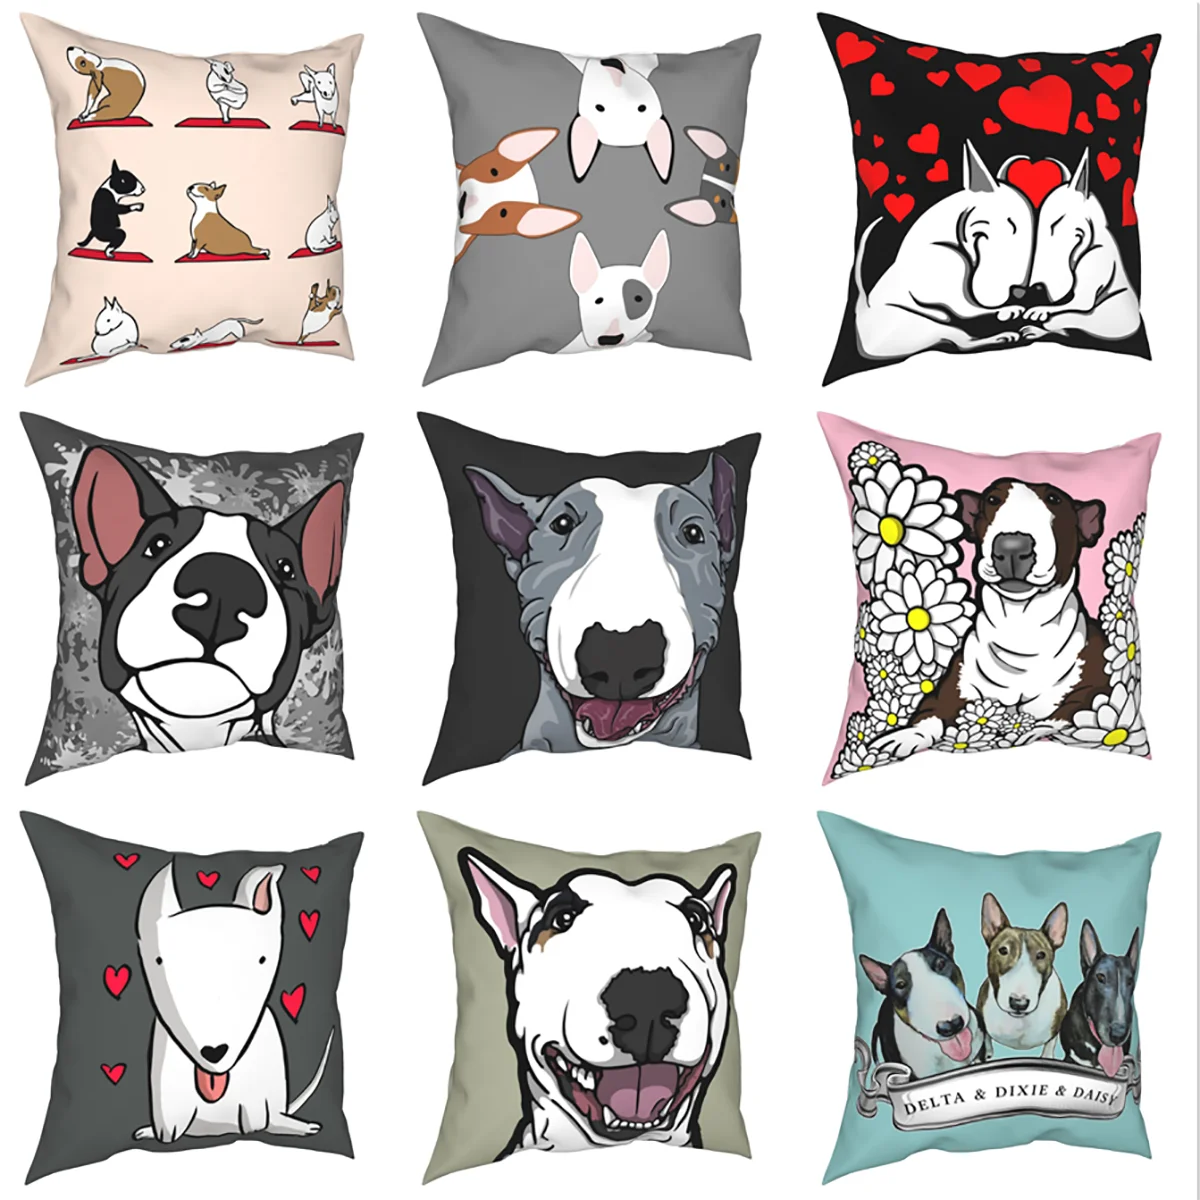 

45x45cm Funny and Cute Bull Terrier Pattern Pillowcase Polyester Square Cushion Cover Decor